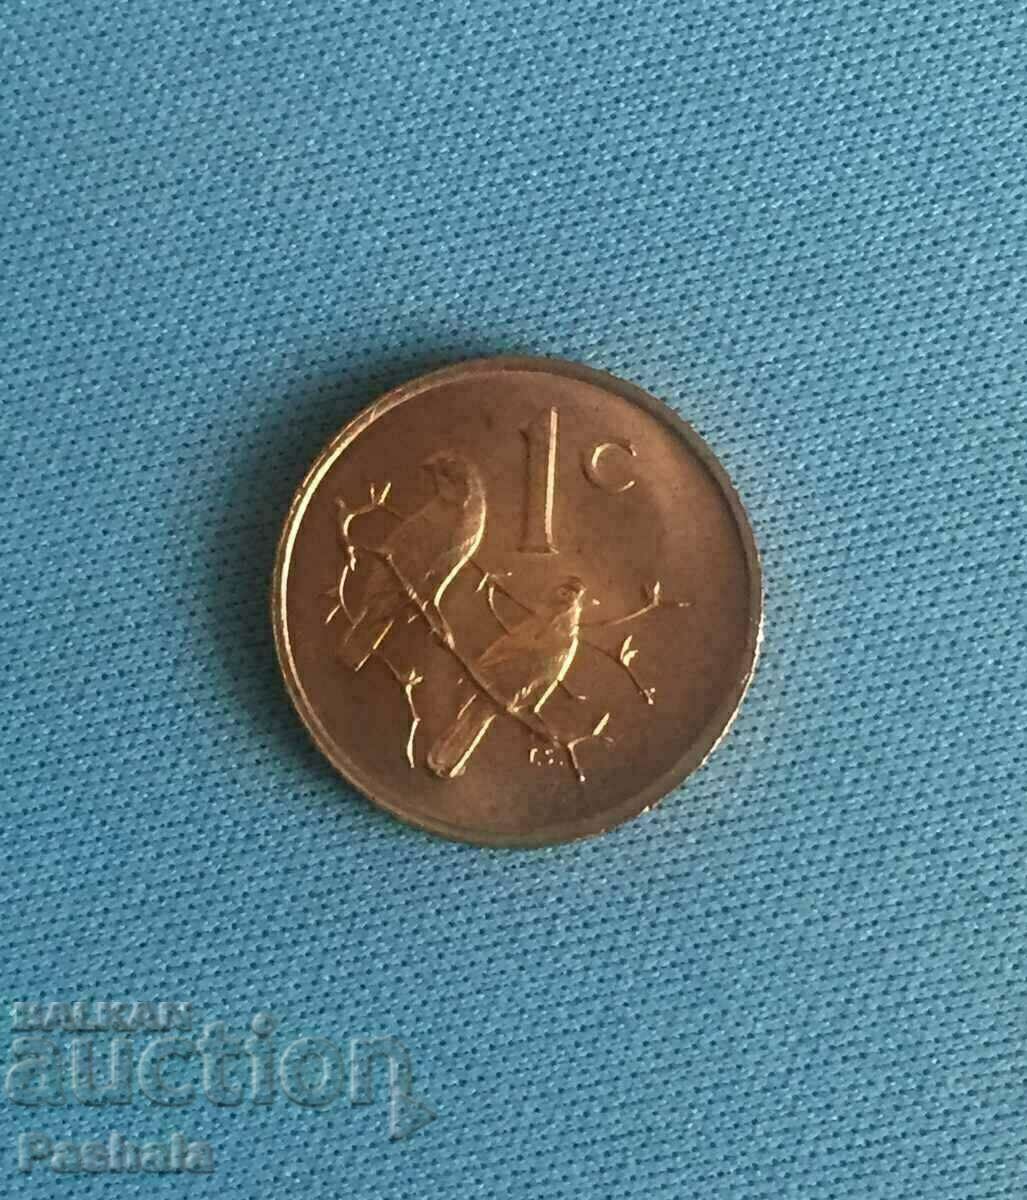 South Africa 1 cent 1969